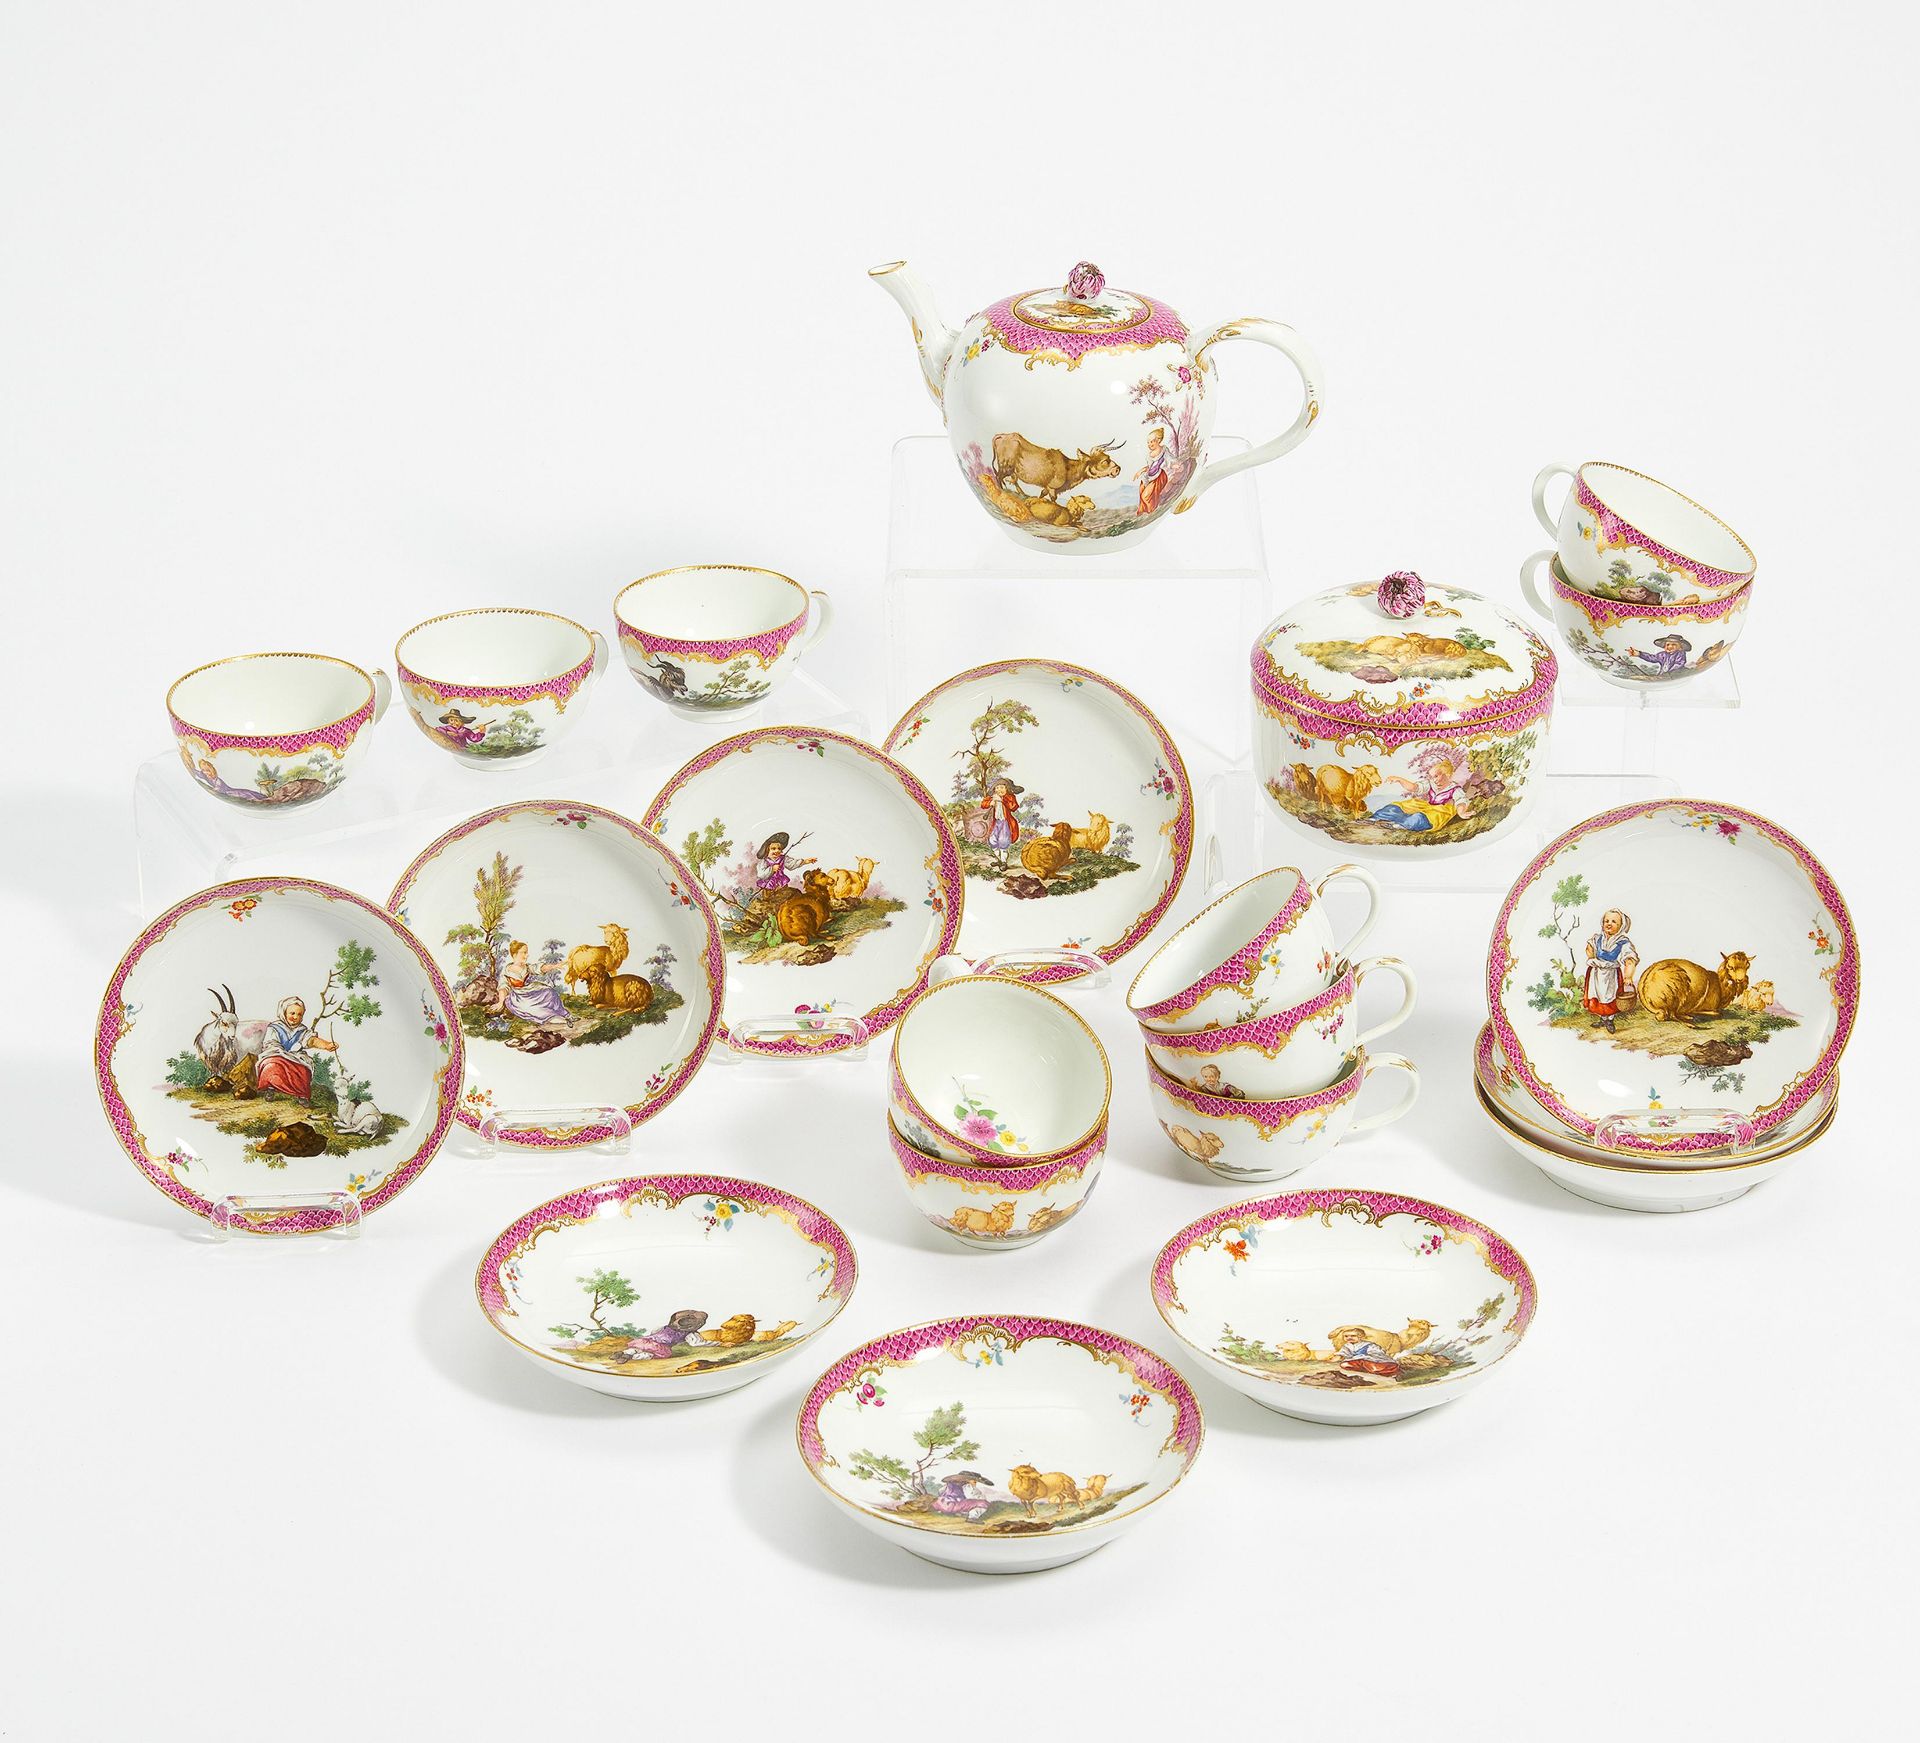 PORCELAIN TEA SERVICE WITH BUCOLIC SCENES. Meissen. 1763-1774. Porcelain, decorated in colours and